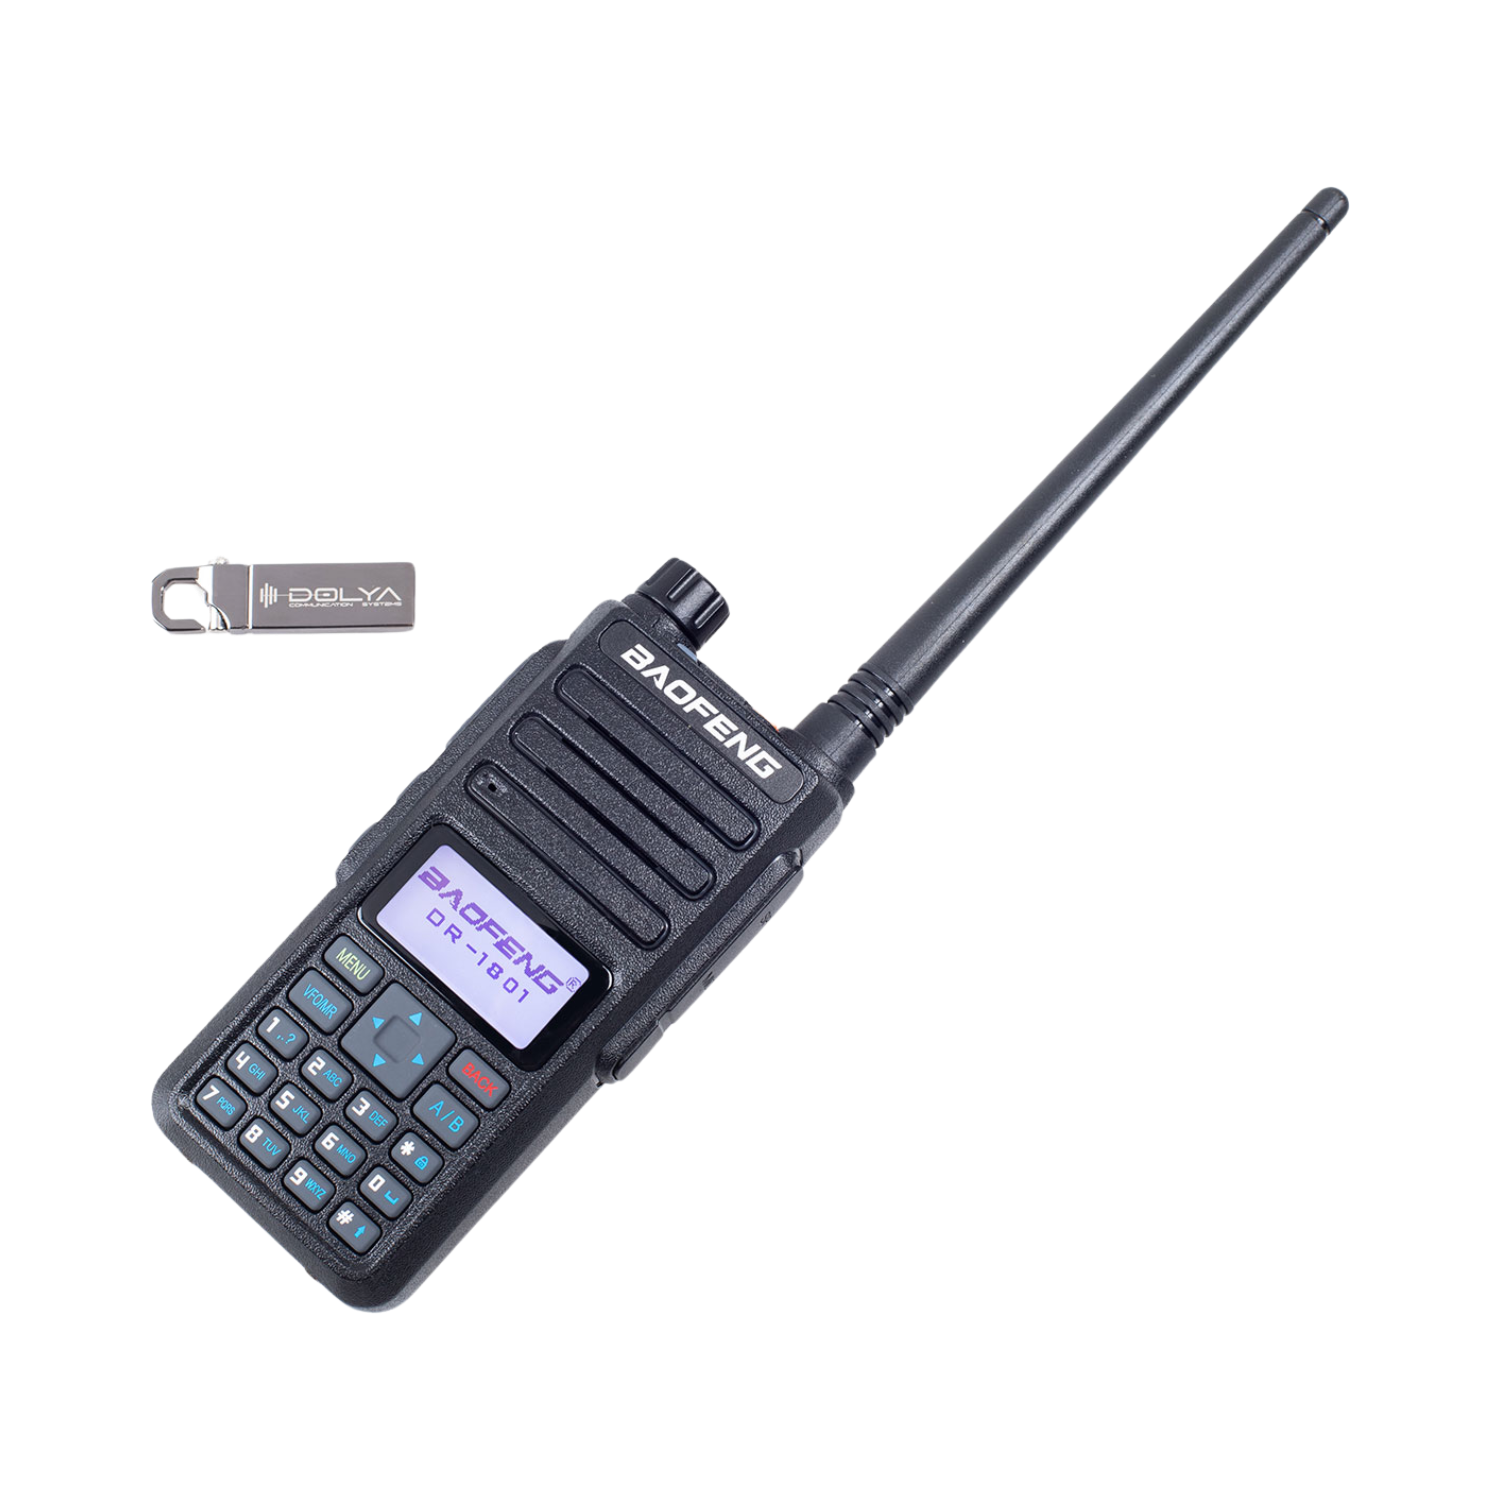 Baofeng DR-1801 DMR Radio with AES-256